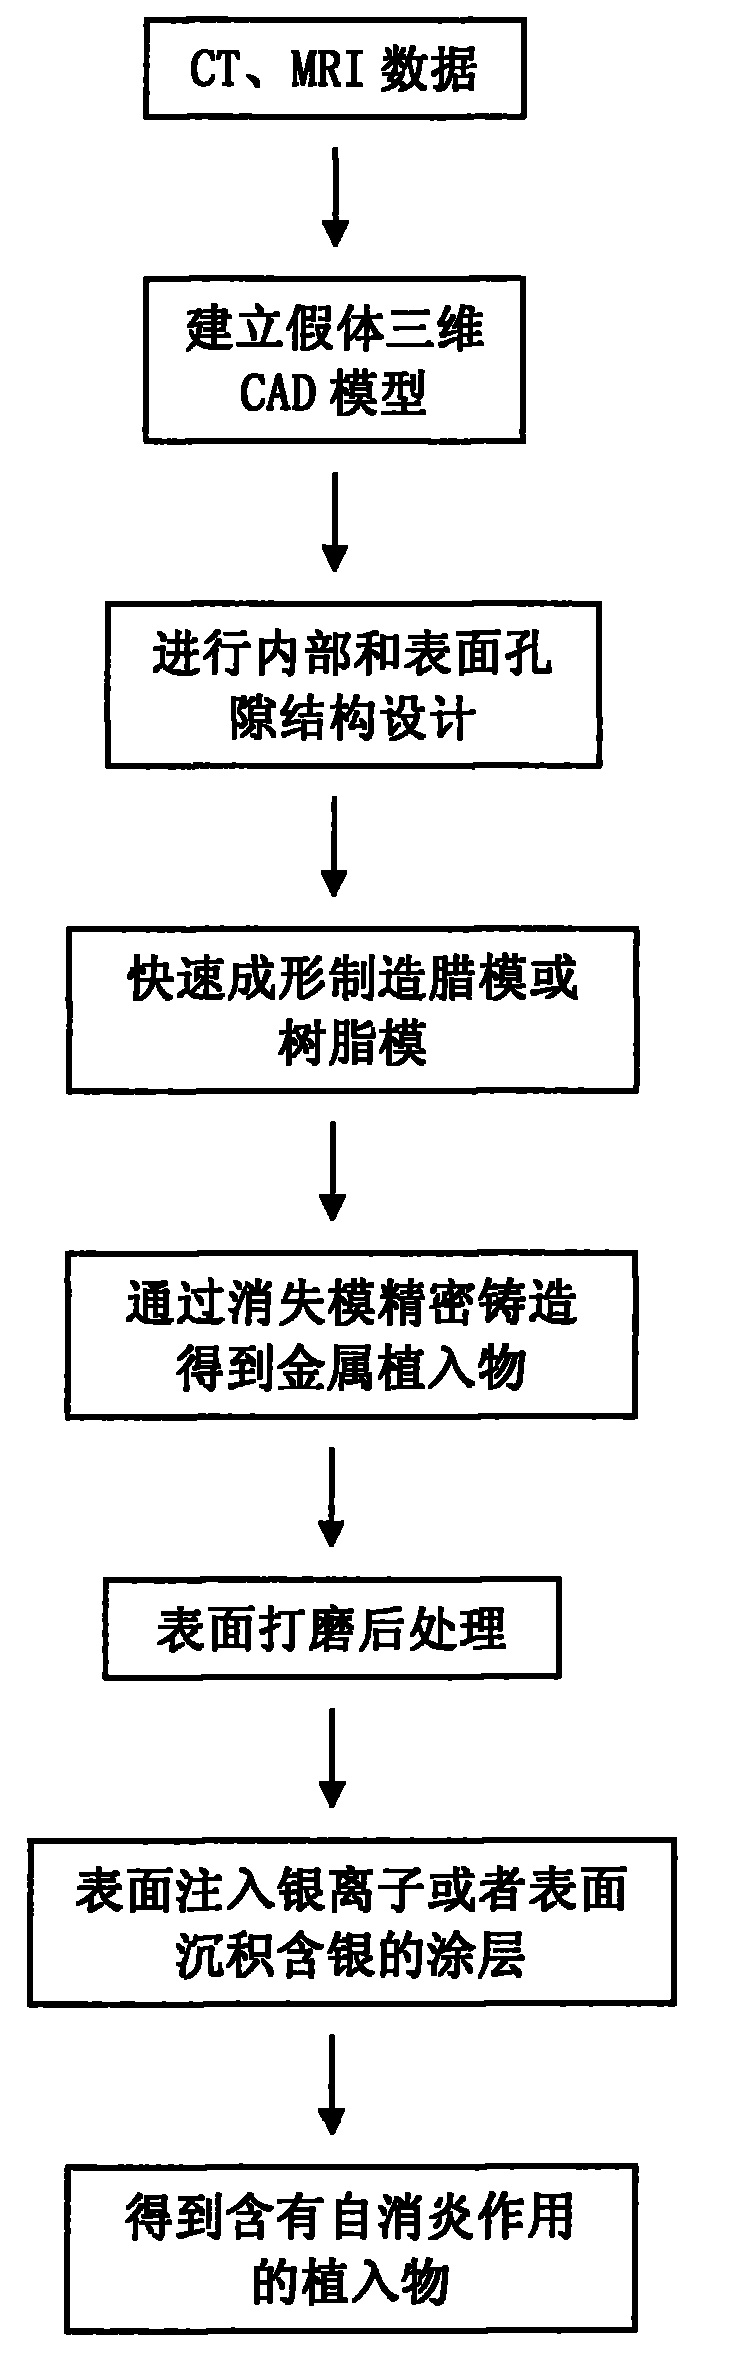 Manufacture method of prosthesis with self-antibacterial action